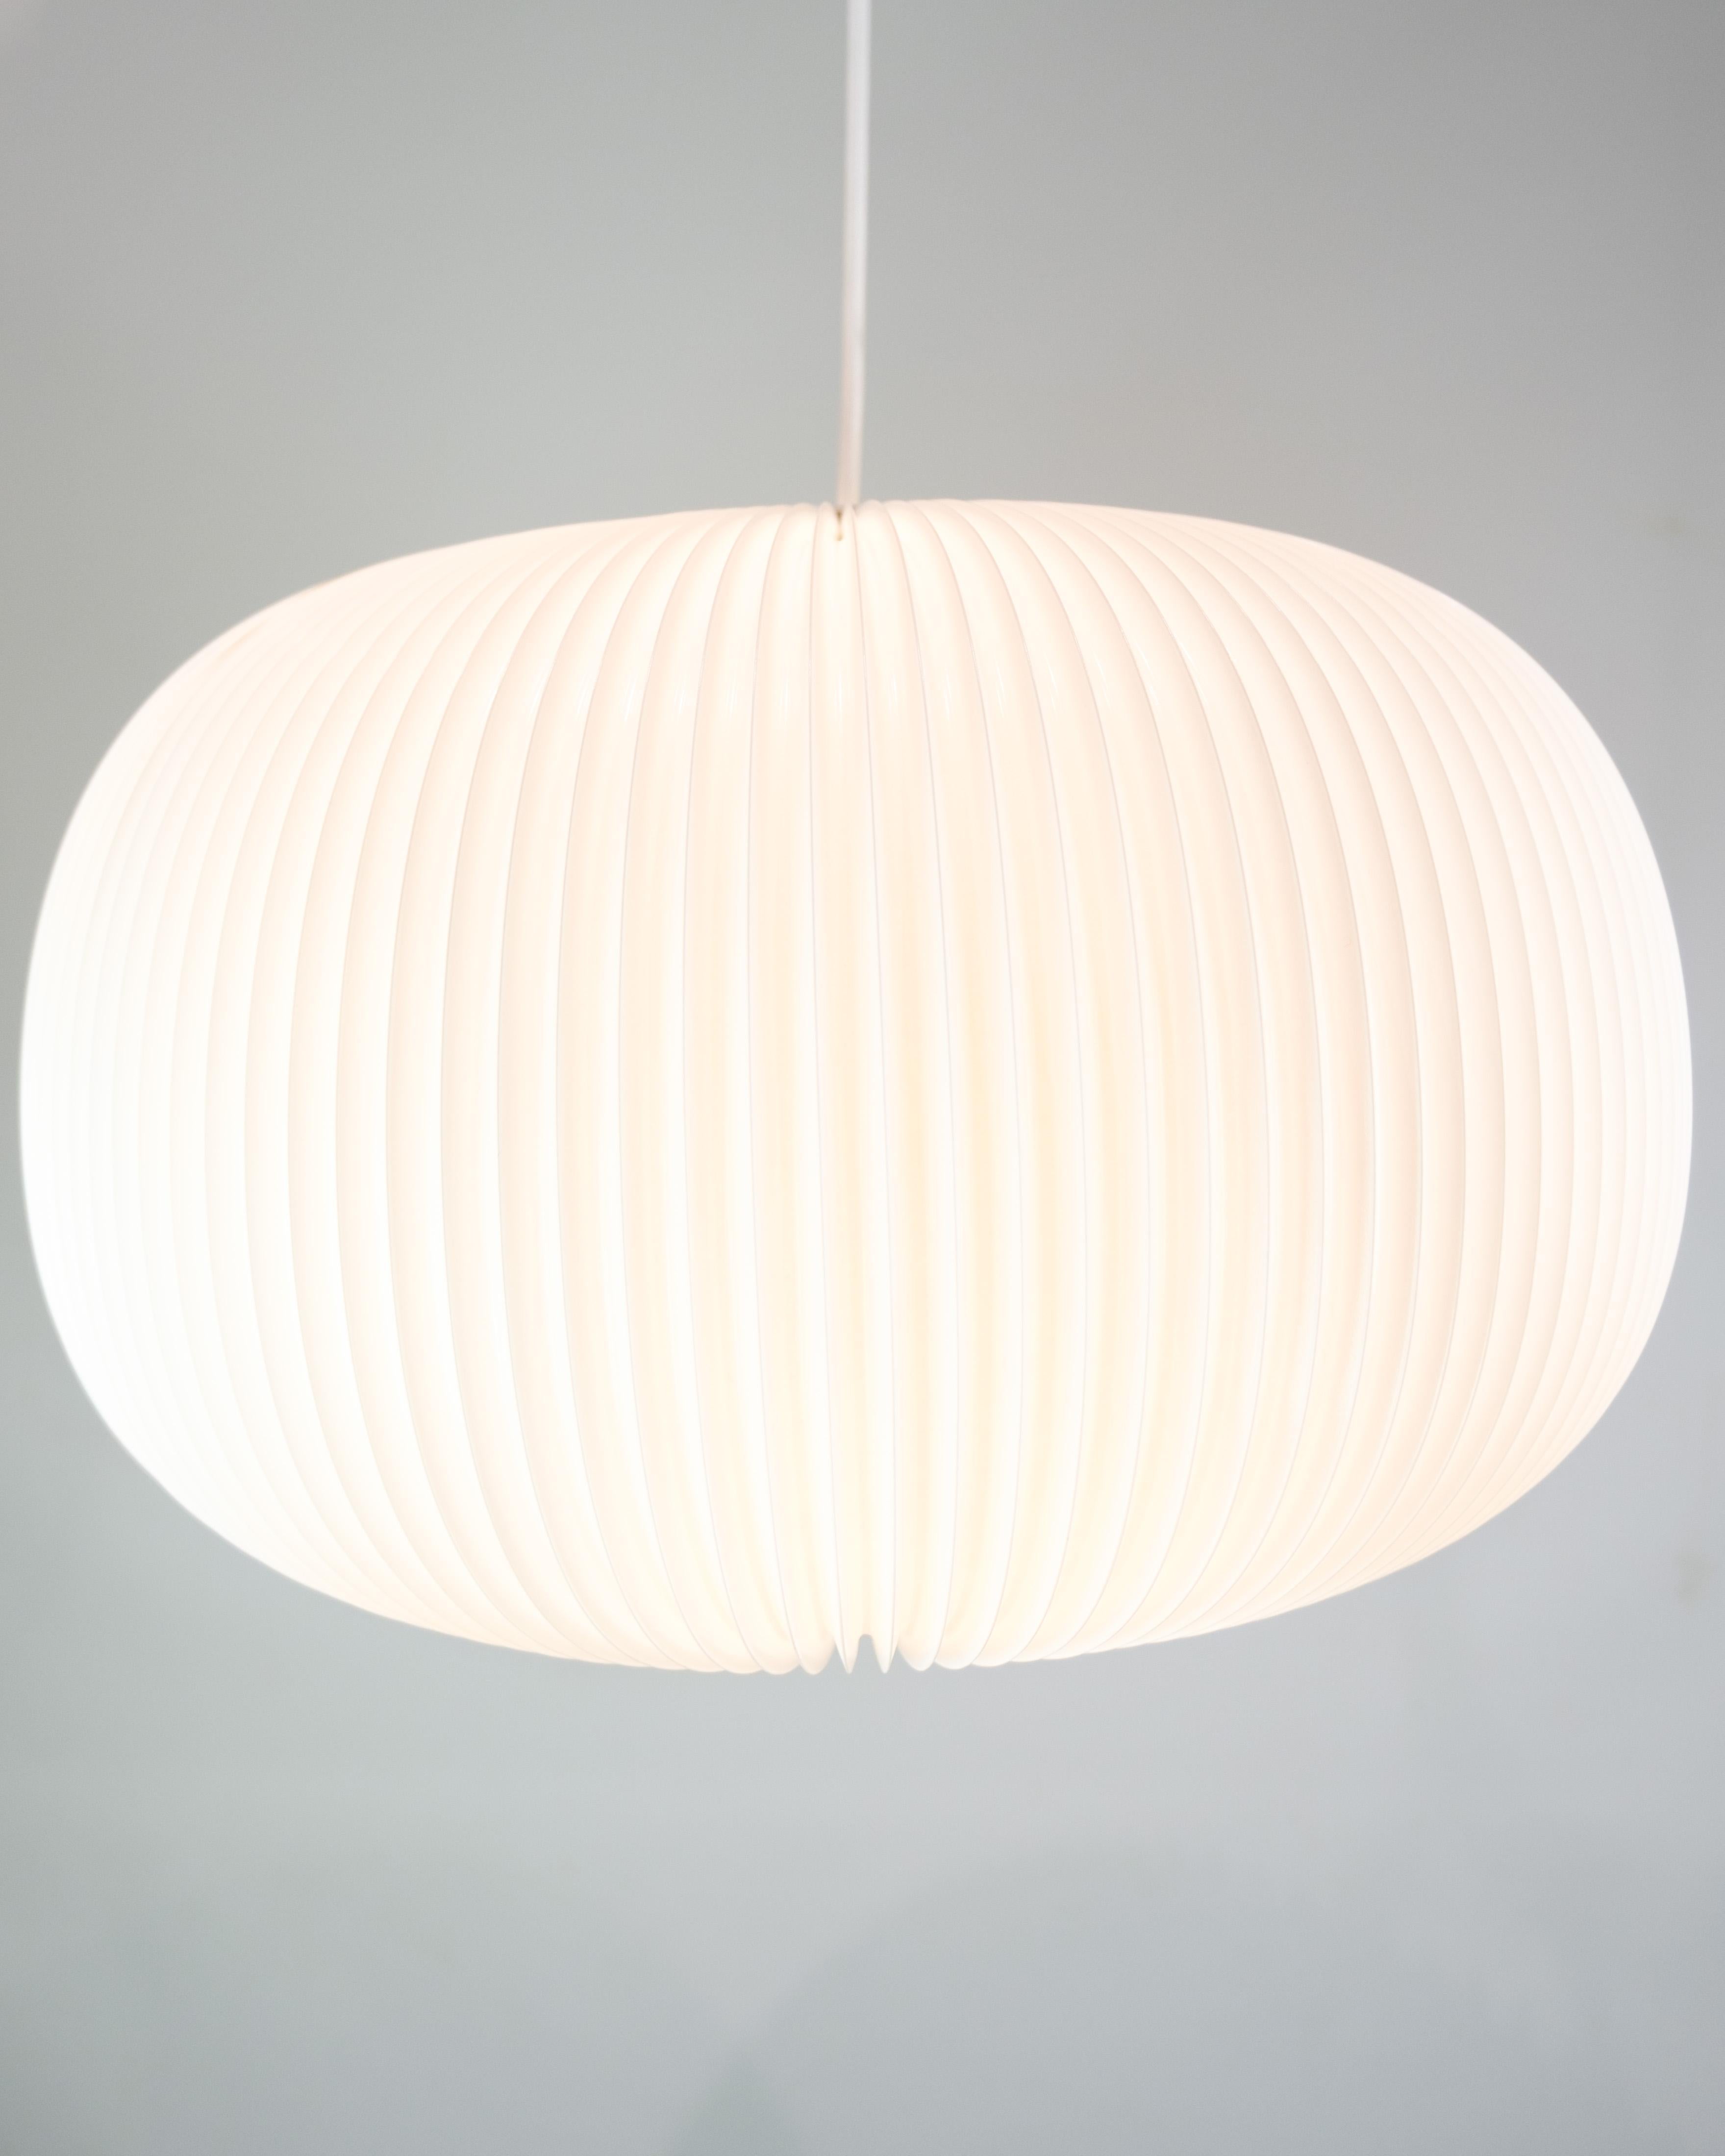 This ceiling lamp, part of the 132 Lamella Series, is an example of modern and elegant lighting design created by Hallgeir Homstvedt and Jonah Takagi. The lamp, in a silver model, is a beautiful combination of functionality and aesthetics.

132